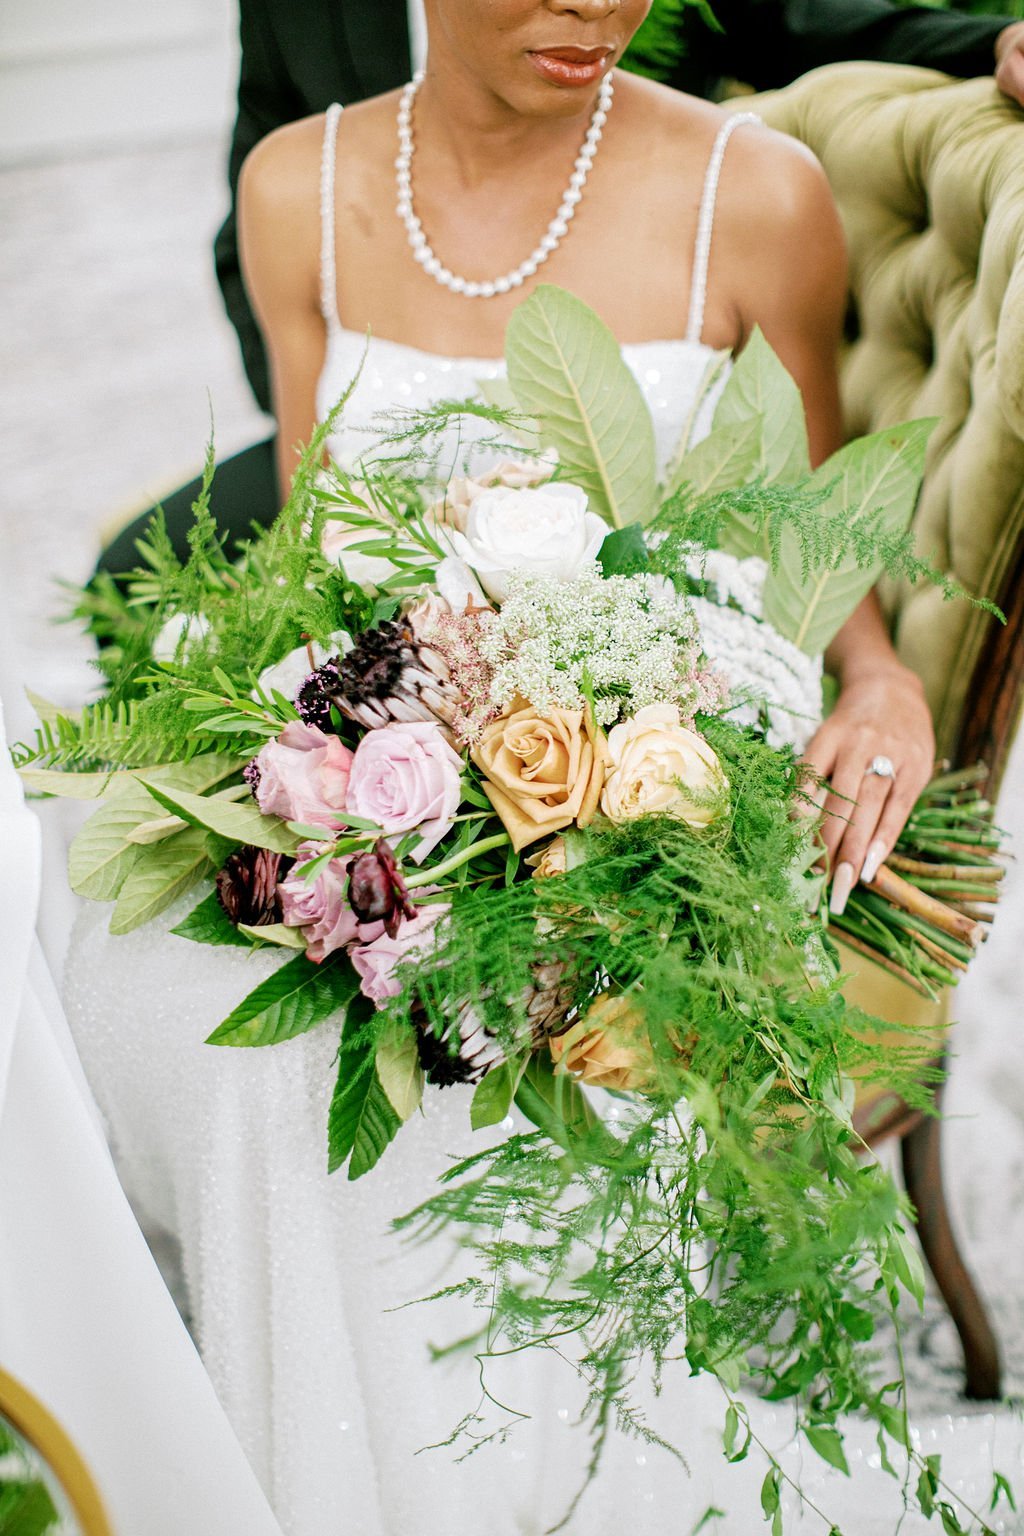 5-things-to-know-before-booking-your-wedding-florist-brought-to-you-by-savannah-wedding-planner-and-savannah-florist-ivory-and-beau-savannah-plant-riverside-district-savannah-wedding-savannah-bridal-shop-maggie-sottero-made-wiith-love-bridal-38.jpg